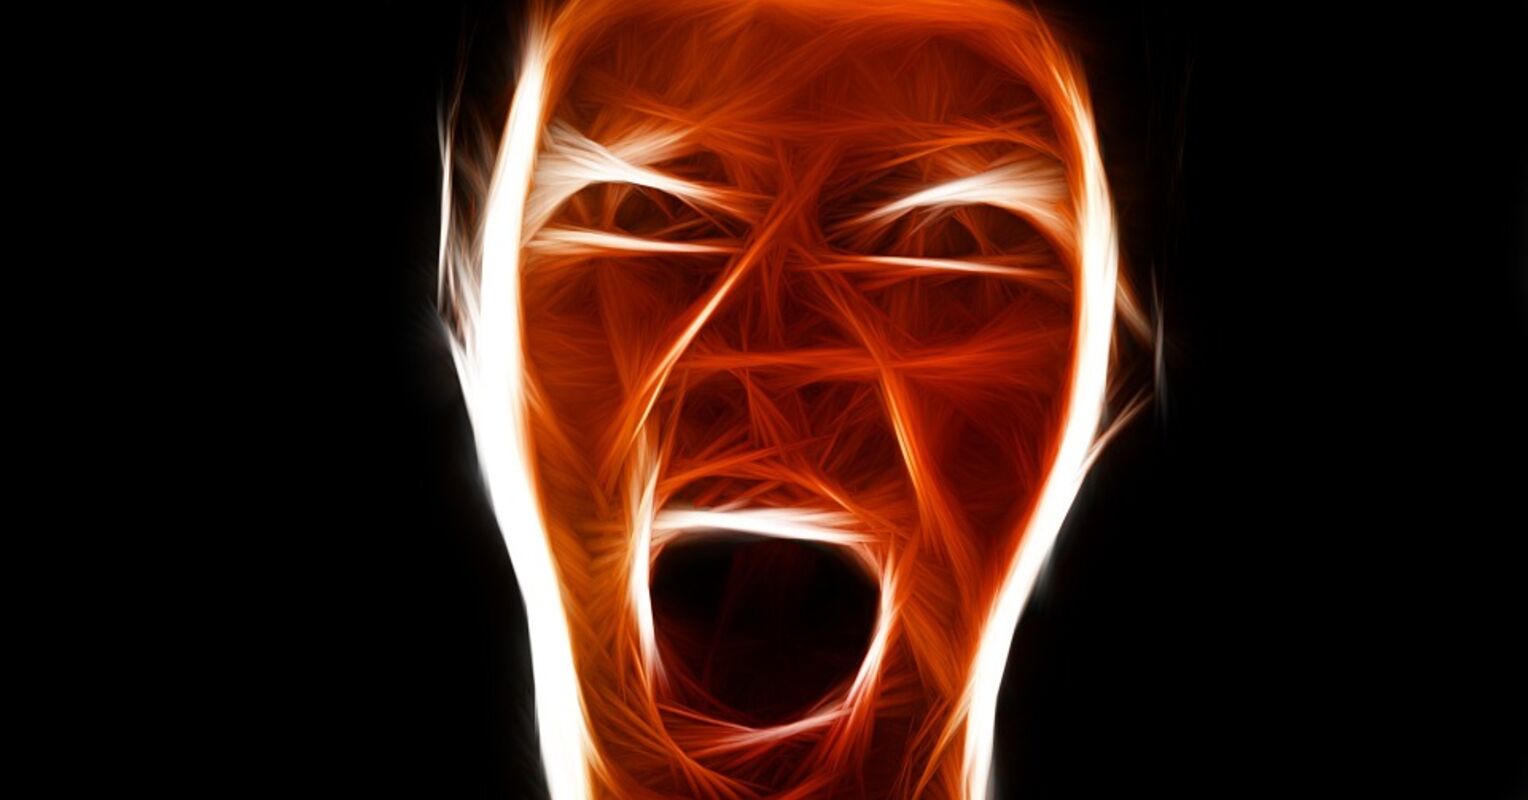 What Your Anger May Be Hiding | Psychology Today